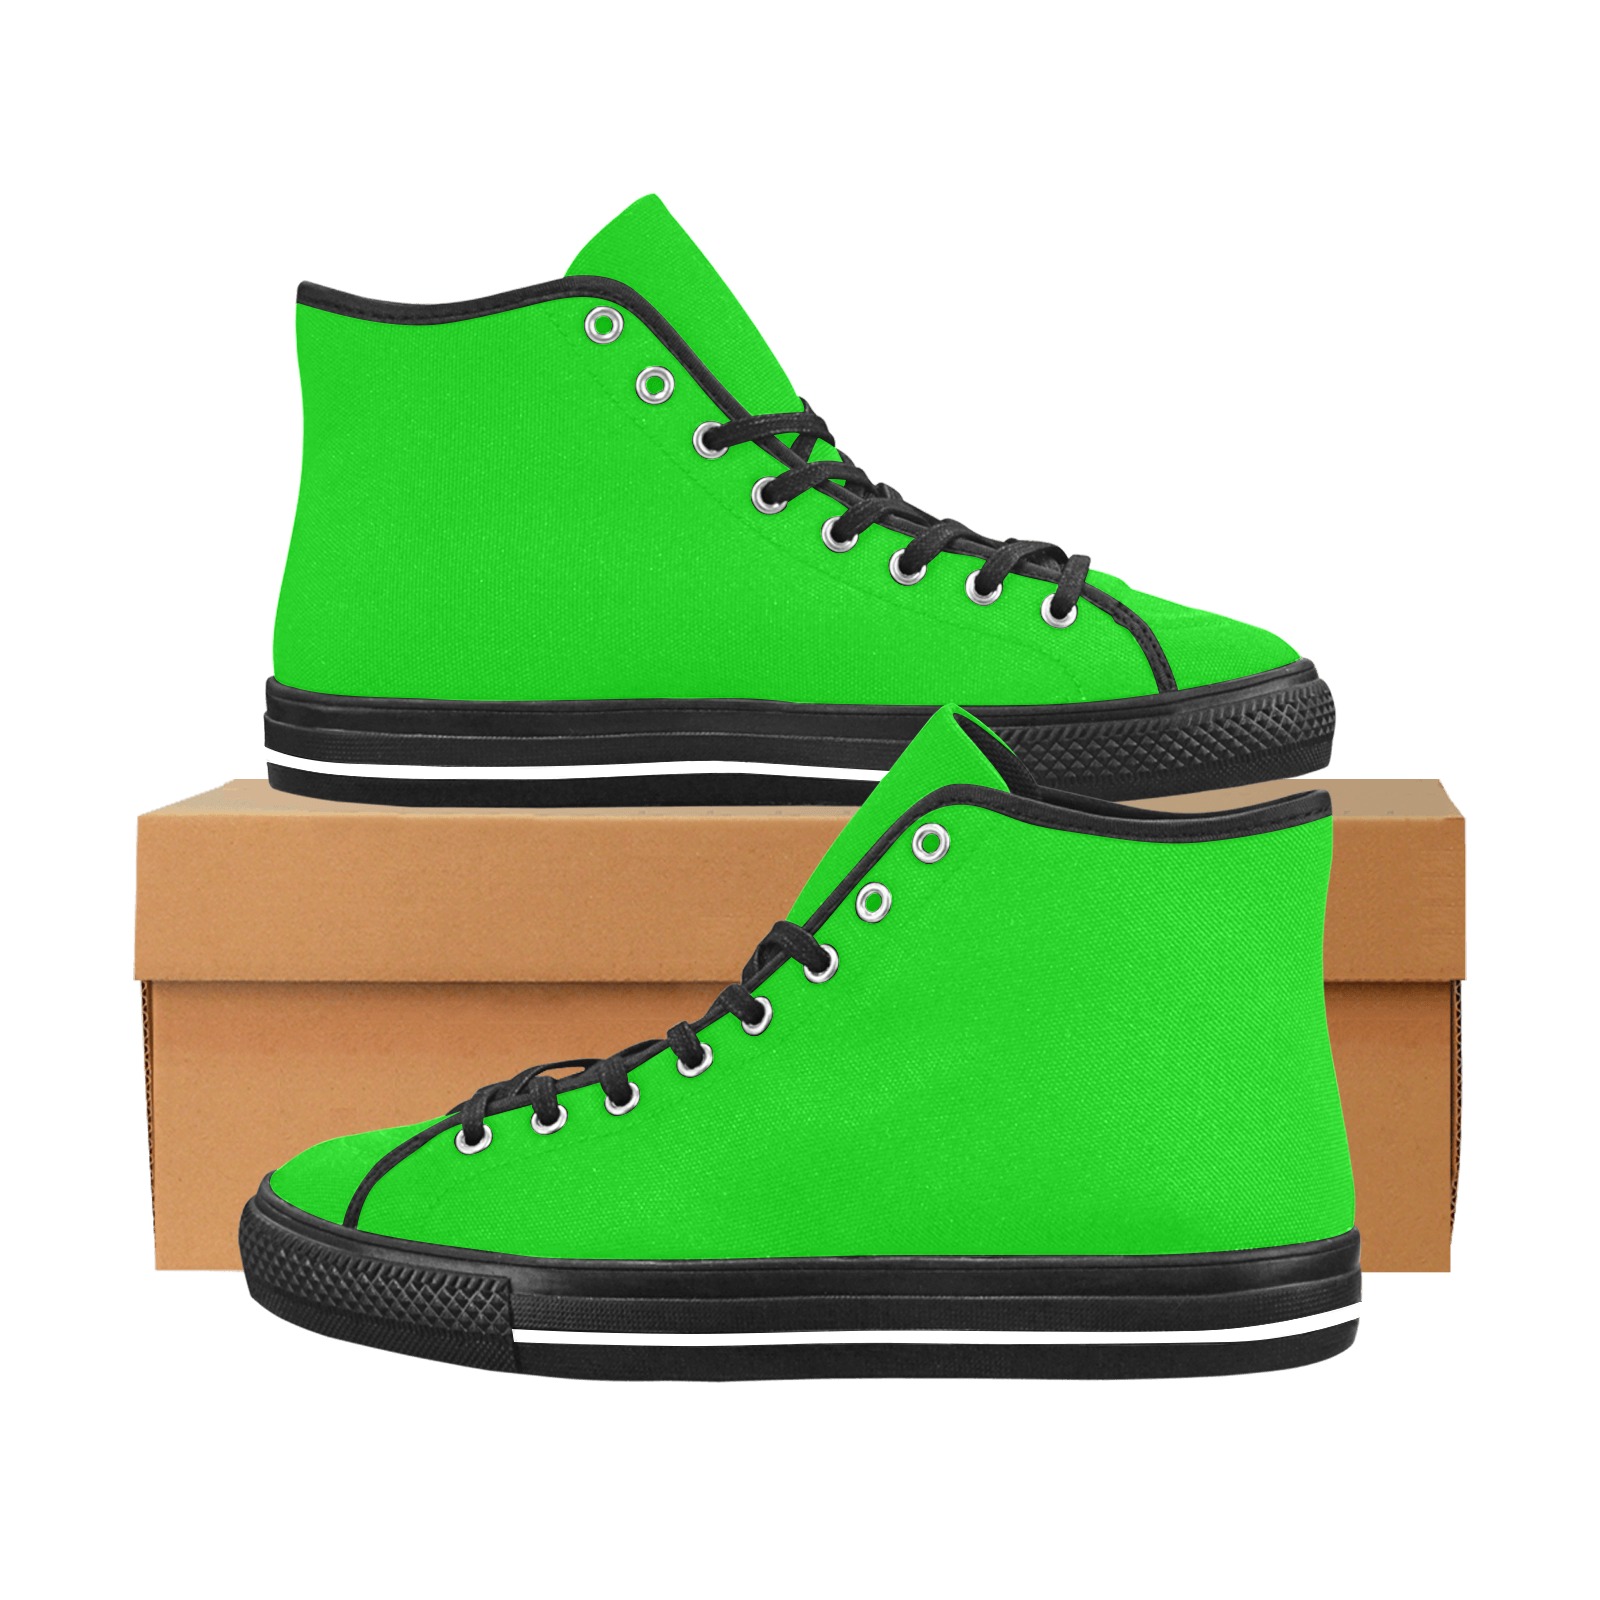 Merry Christmas Green Solid Color Vancouver H Women's Canvas Shoes (1013-1)